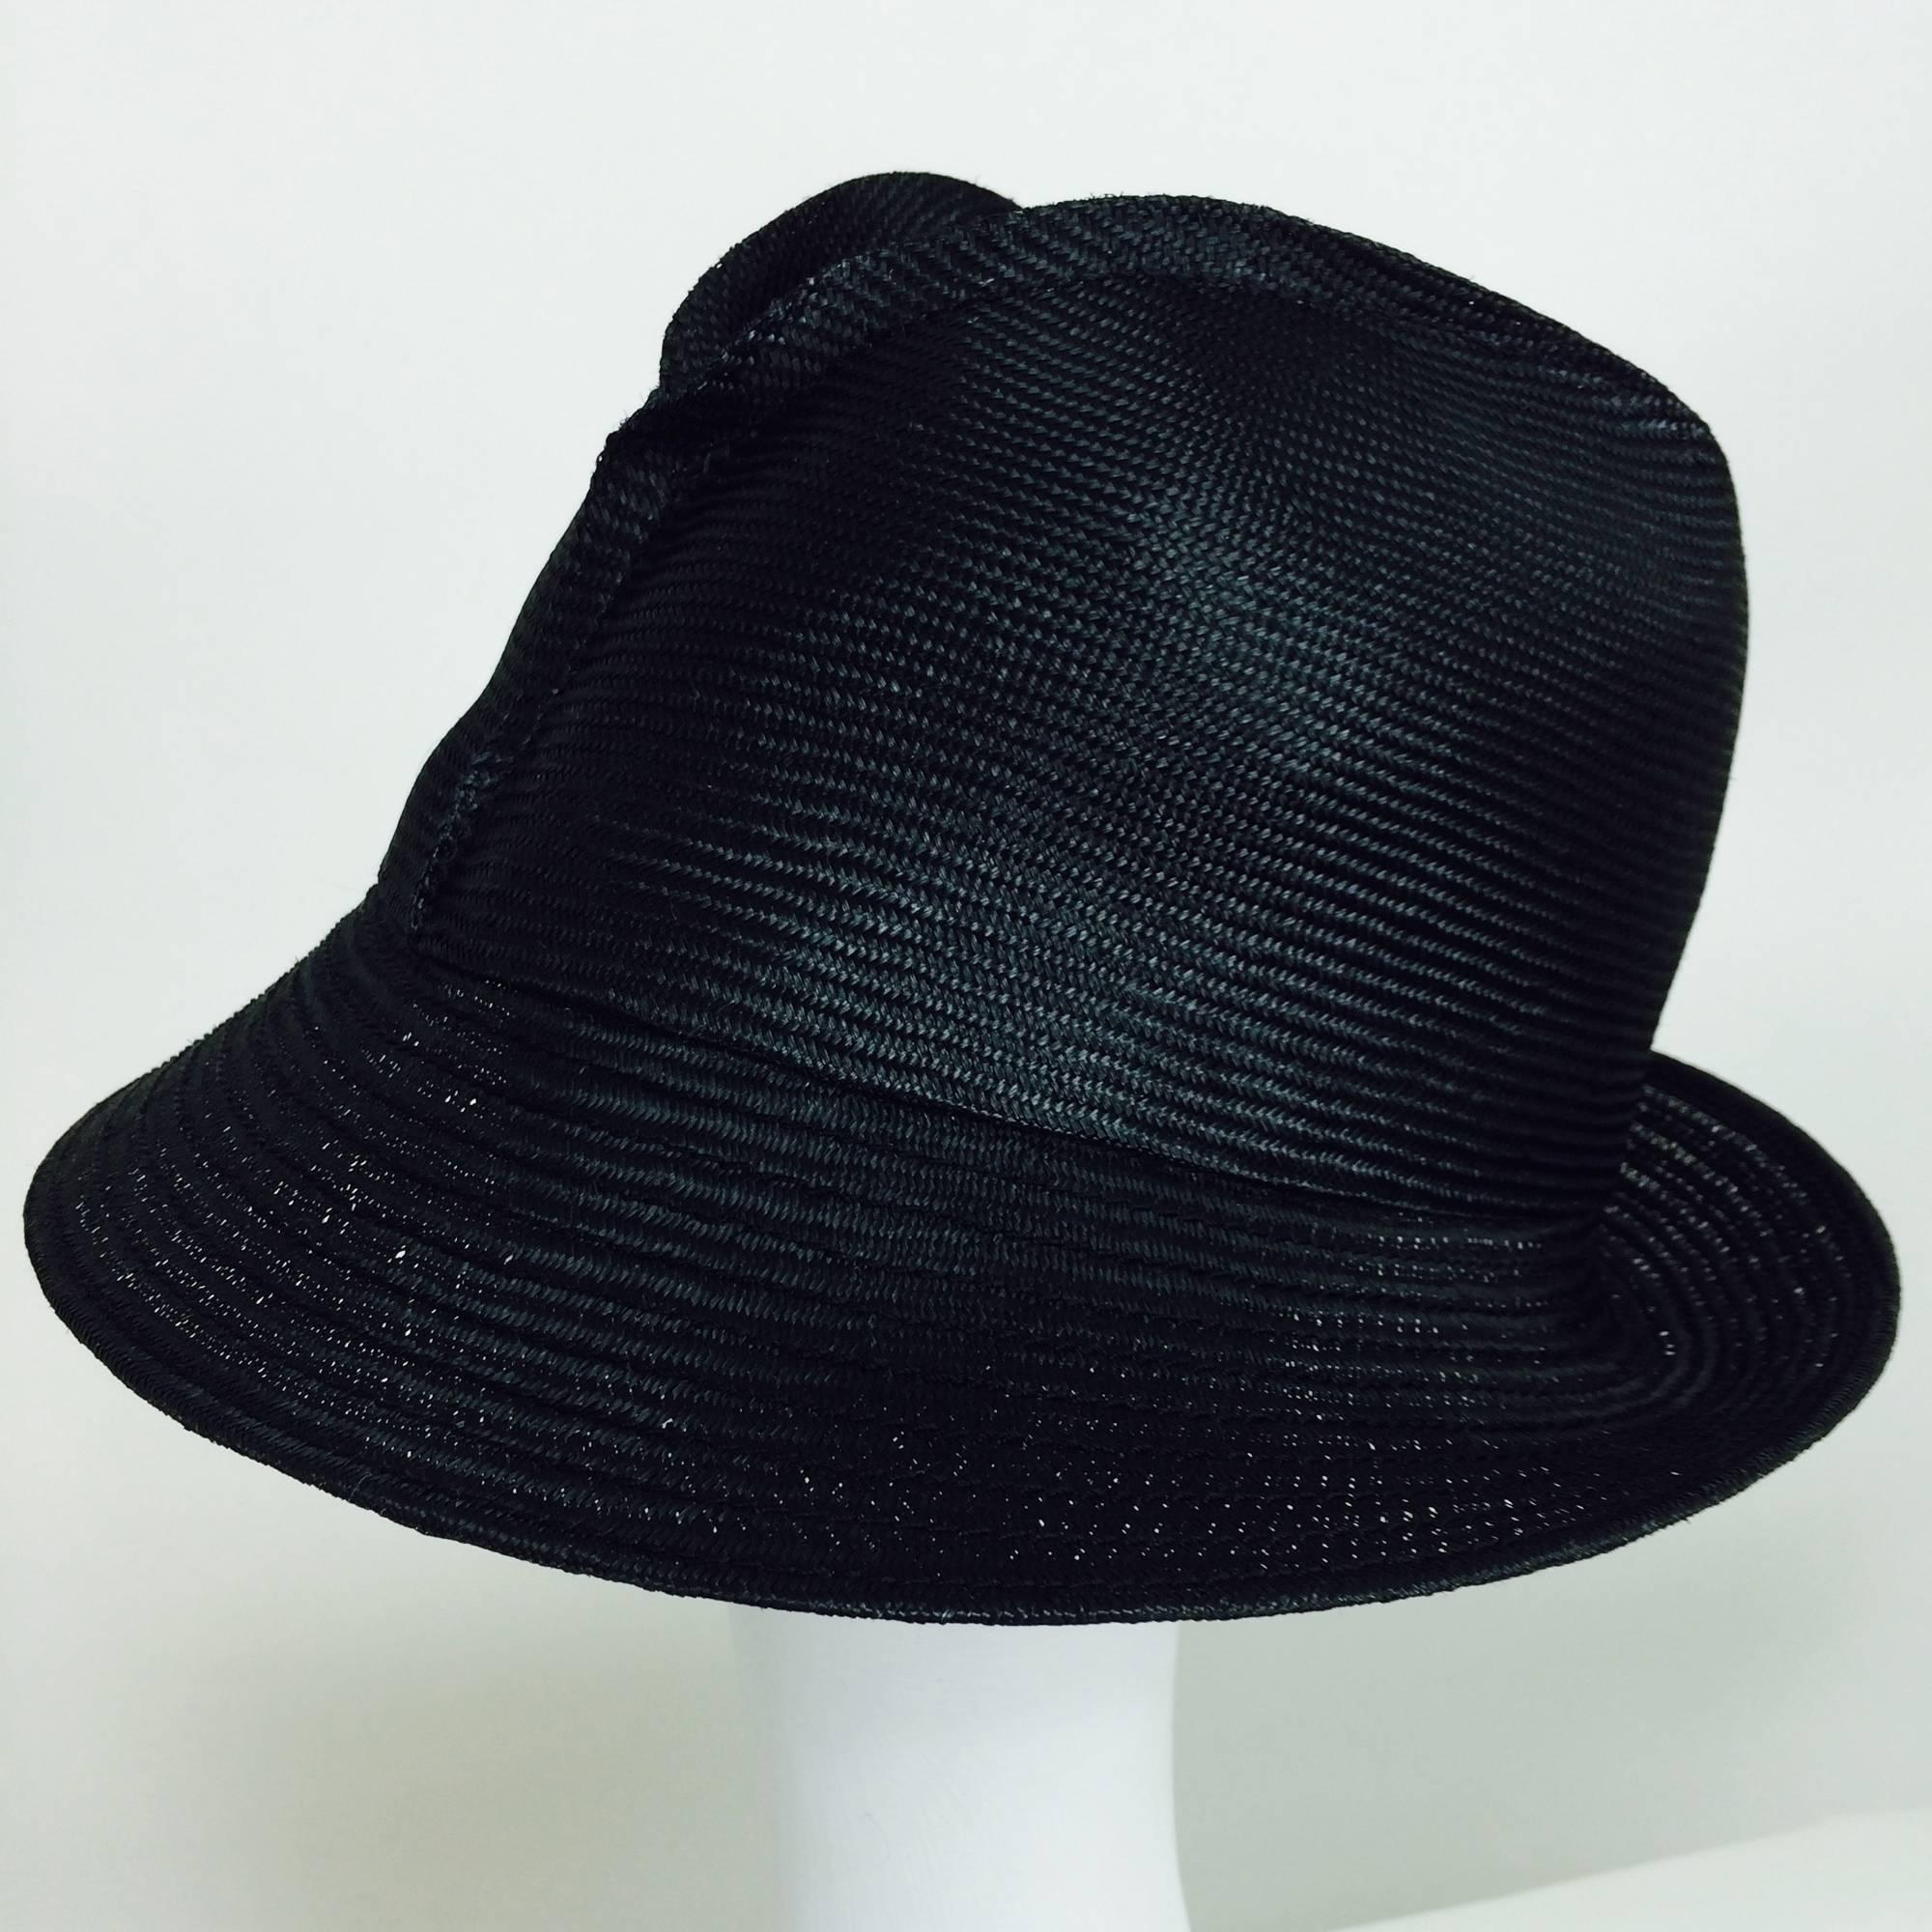 Vintage outwardly seamed glazed black straw cloche 1960s...A hat with a slightly 1920s flapper shape but very modern...High crown sits low on the head...The outside front (crown) of the hat has shaped pleating (forming an abstract Y) purposely